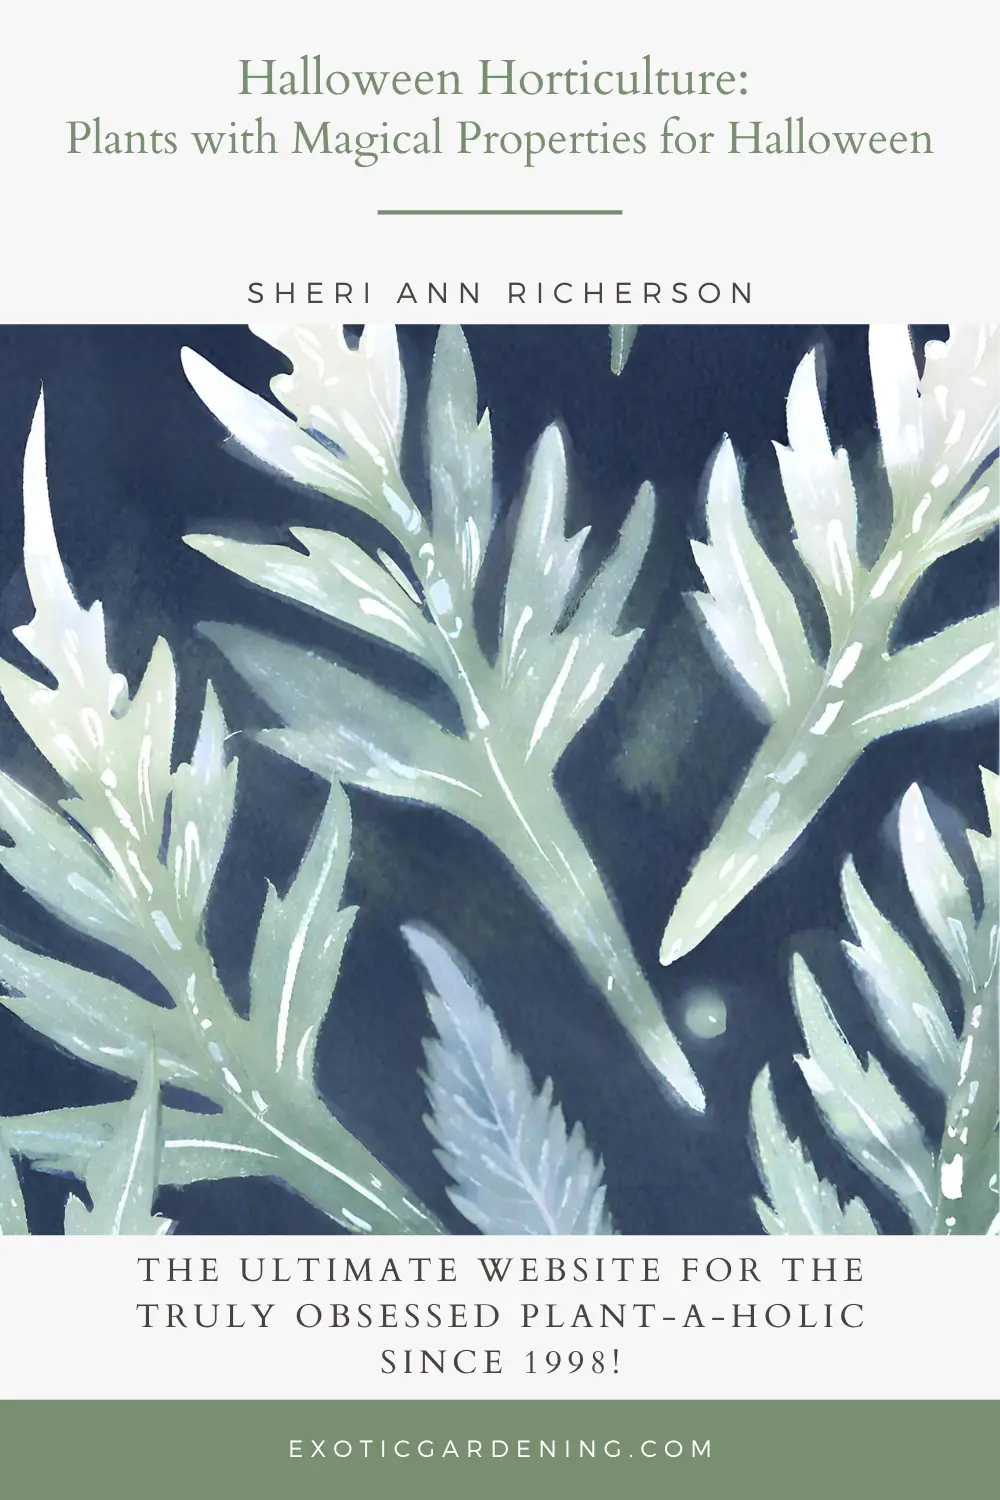 Mugwort Leaves in Moonlight: A close-up of silvery-green mugwort leaves, bathed in the gentle glow of moonlight, showcasing their ethereal quality.